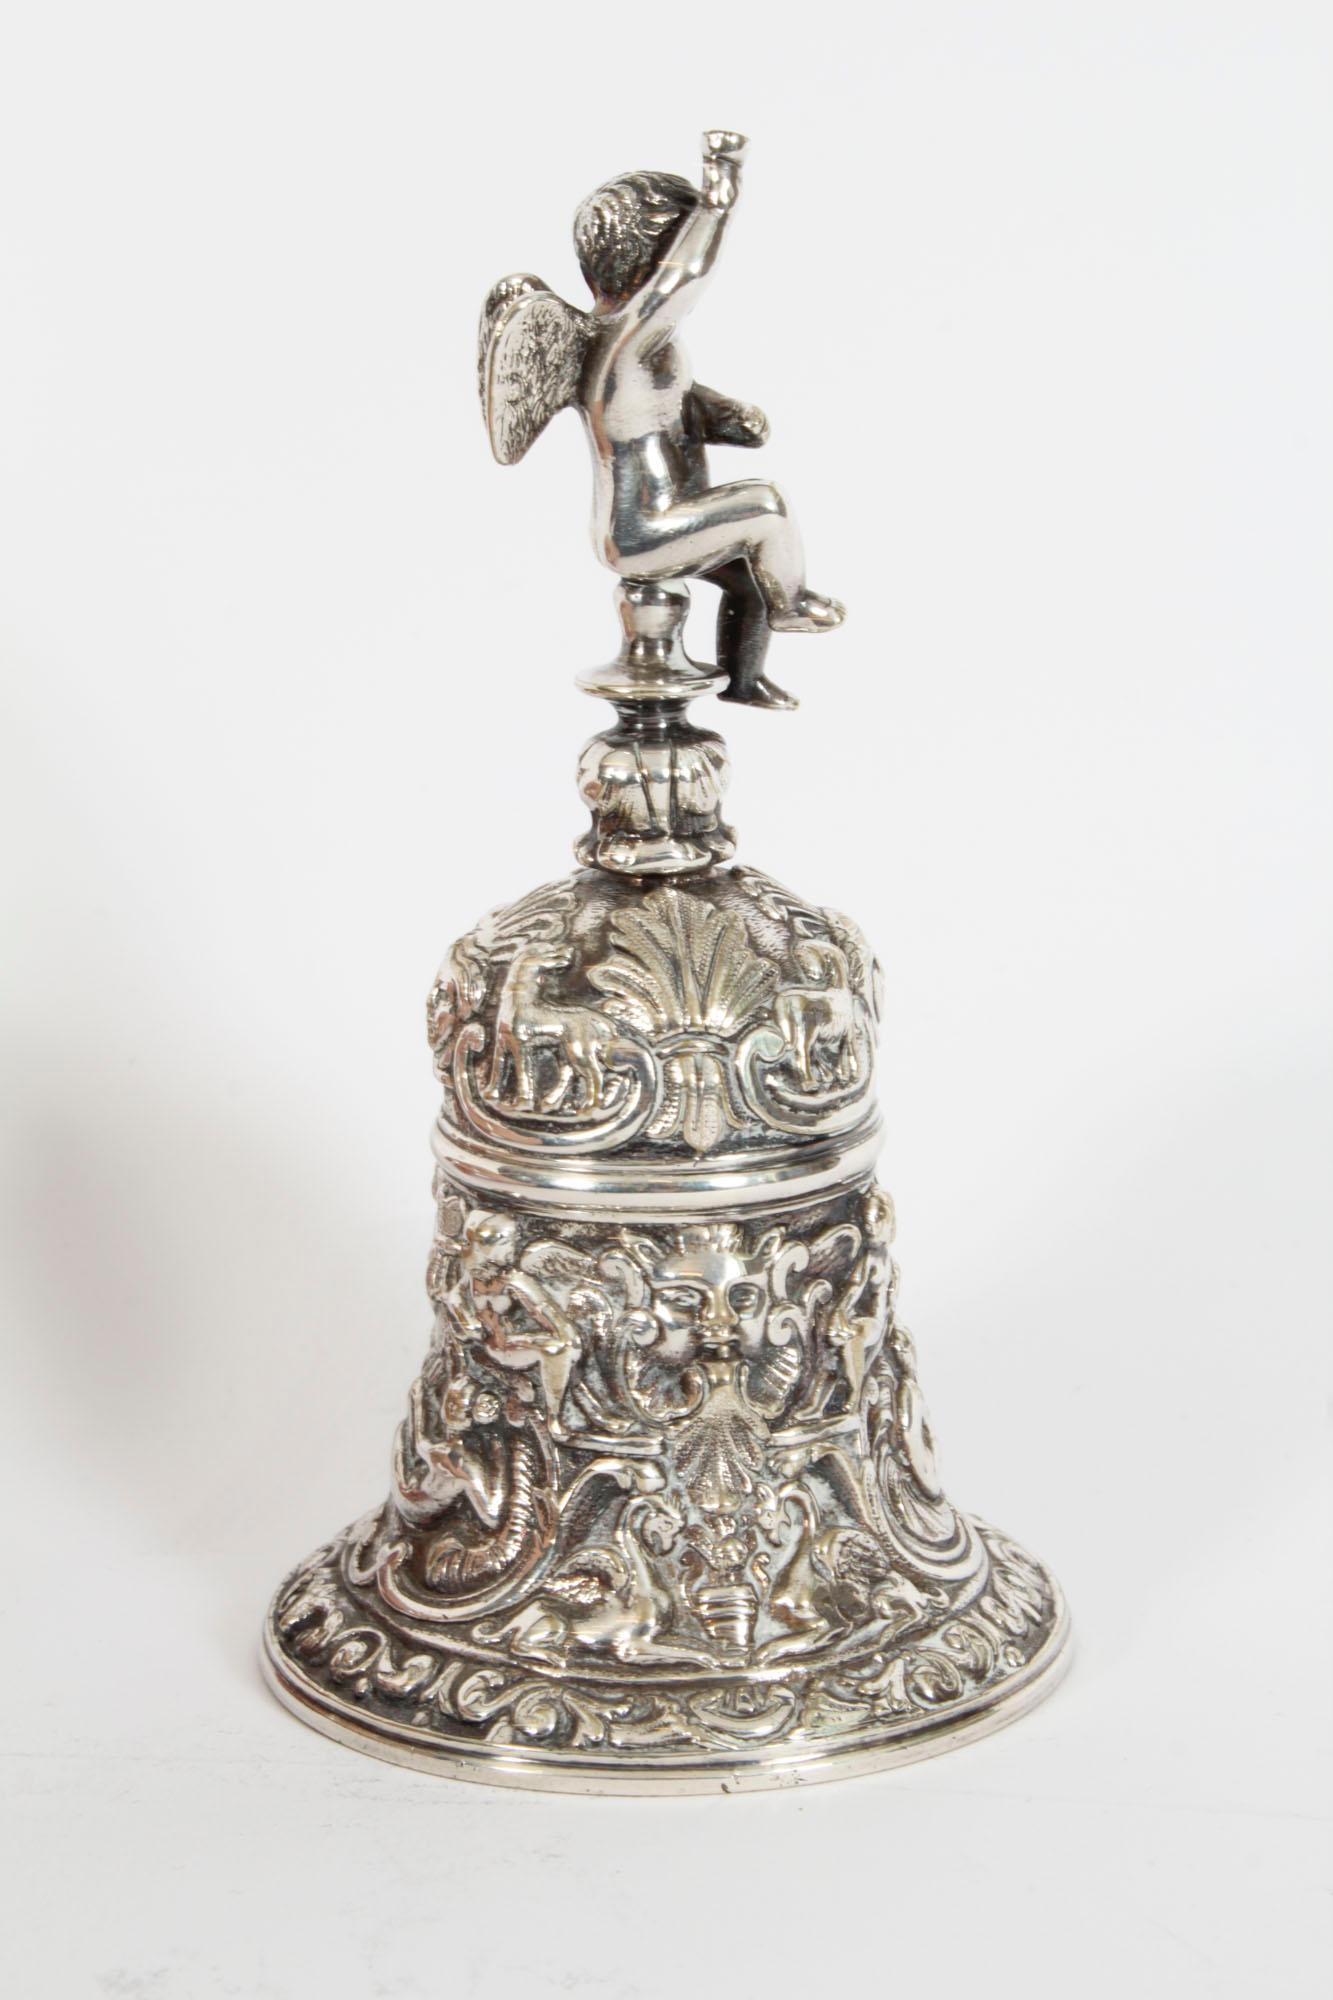 English Antique Silver Plated Hand Bell Renaissance Revival 19th Century